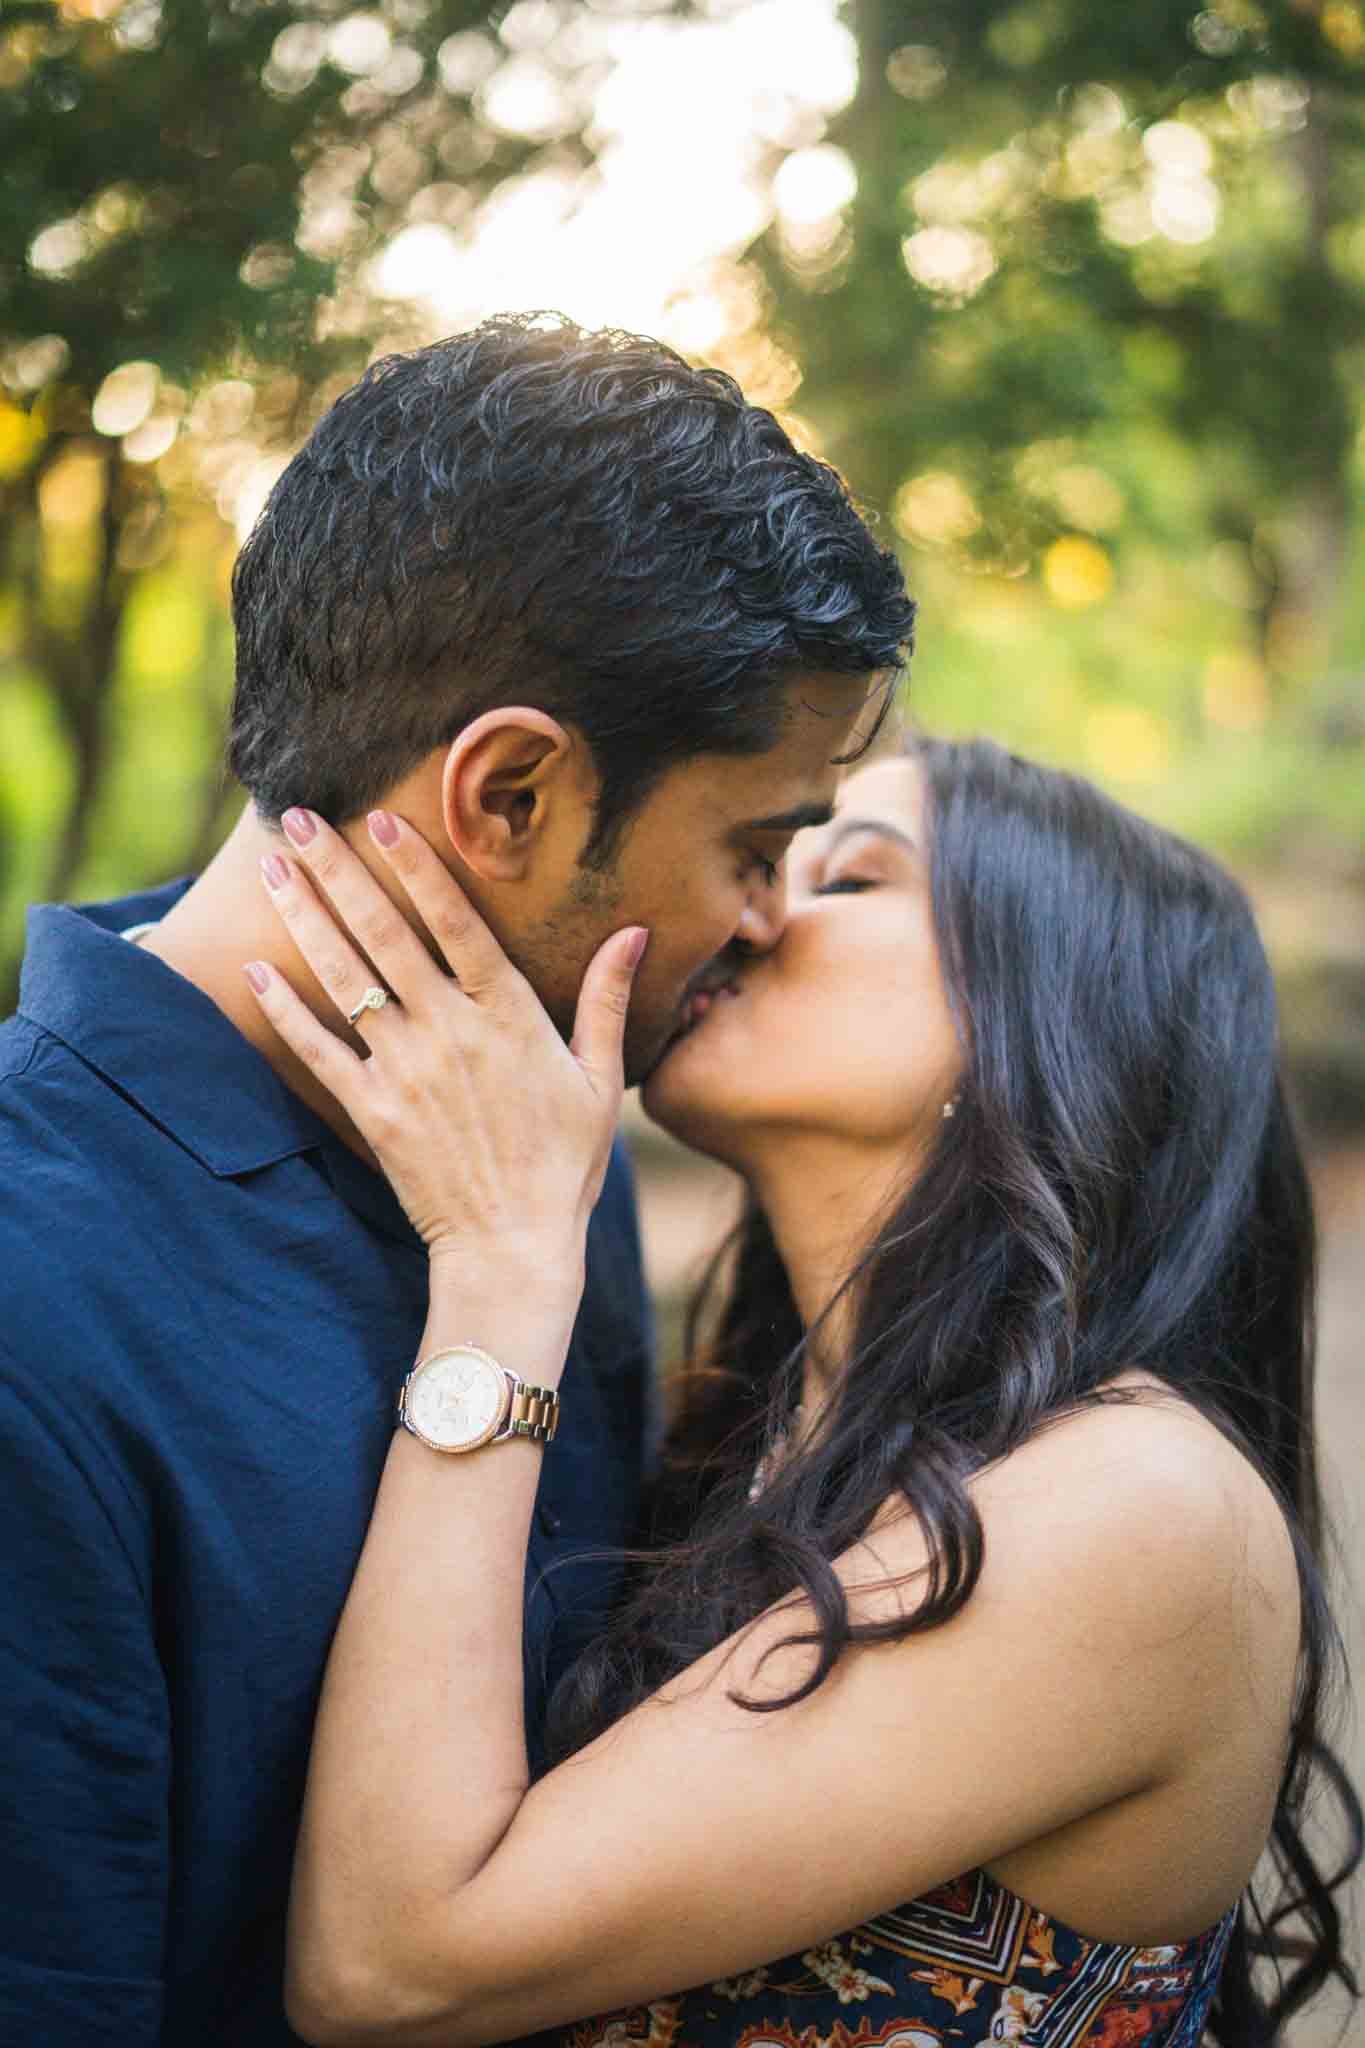 5 of the Best Poses for Your Engagement Session!